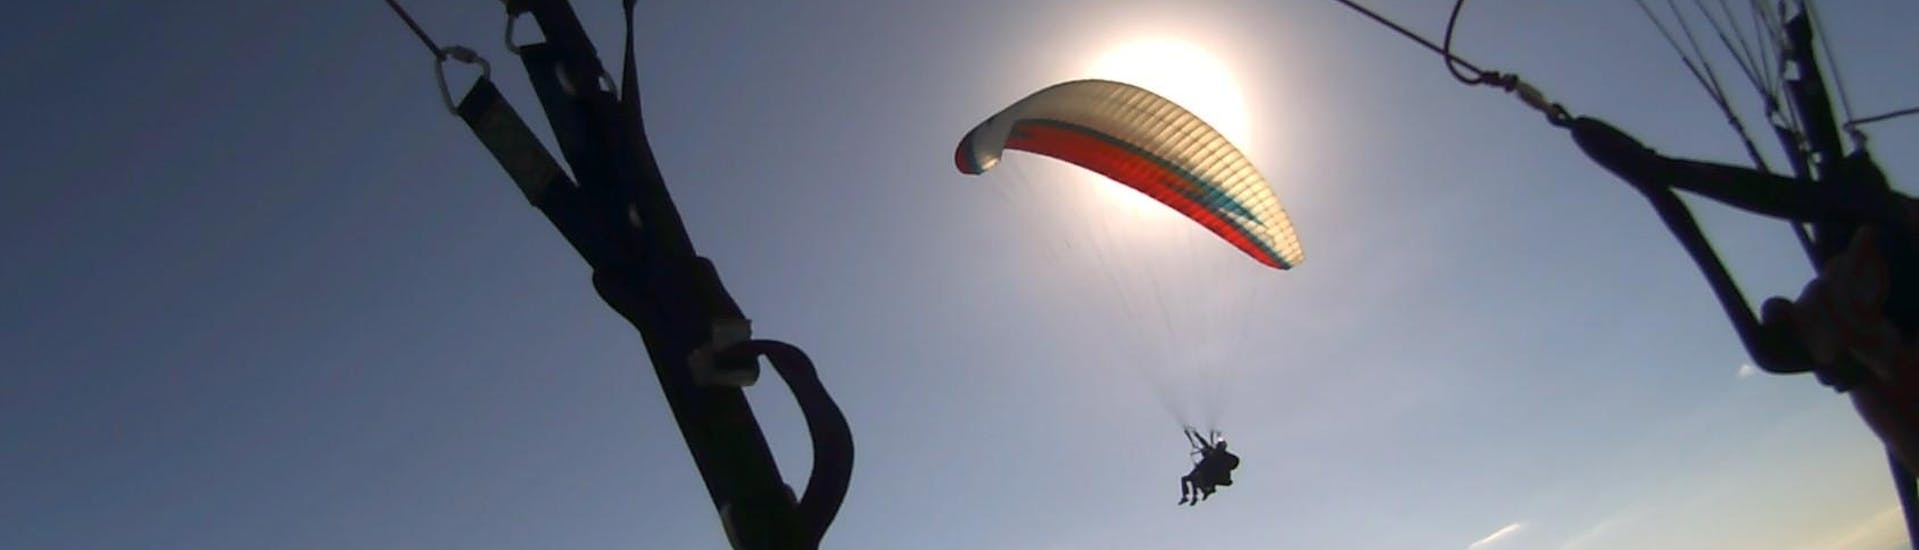 Tandem Paragliding for Couples - Lazio with Sky Experience Lazio - Hero image